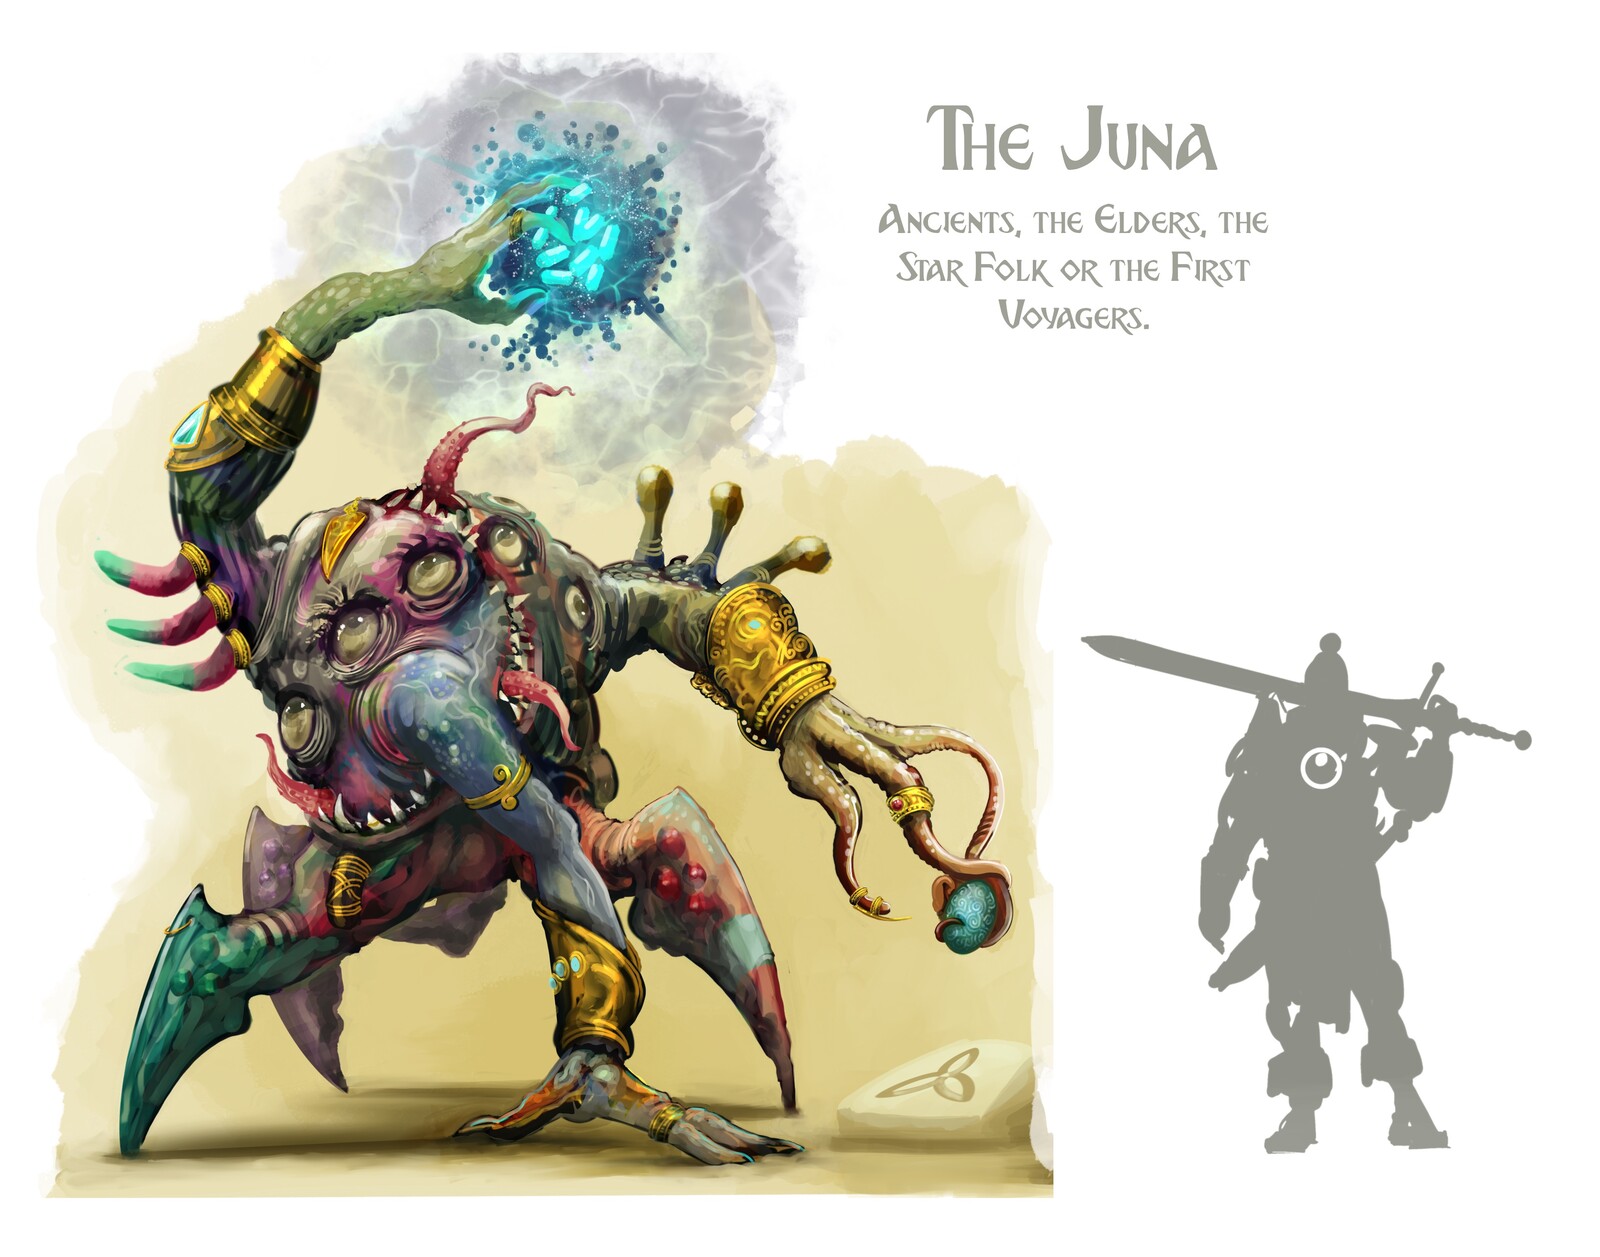 An illustration of the highly magical creator race, The Juna. Human adventurer for scale.